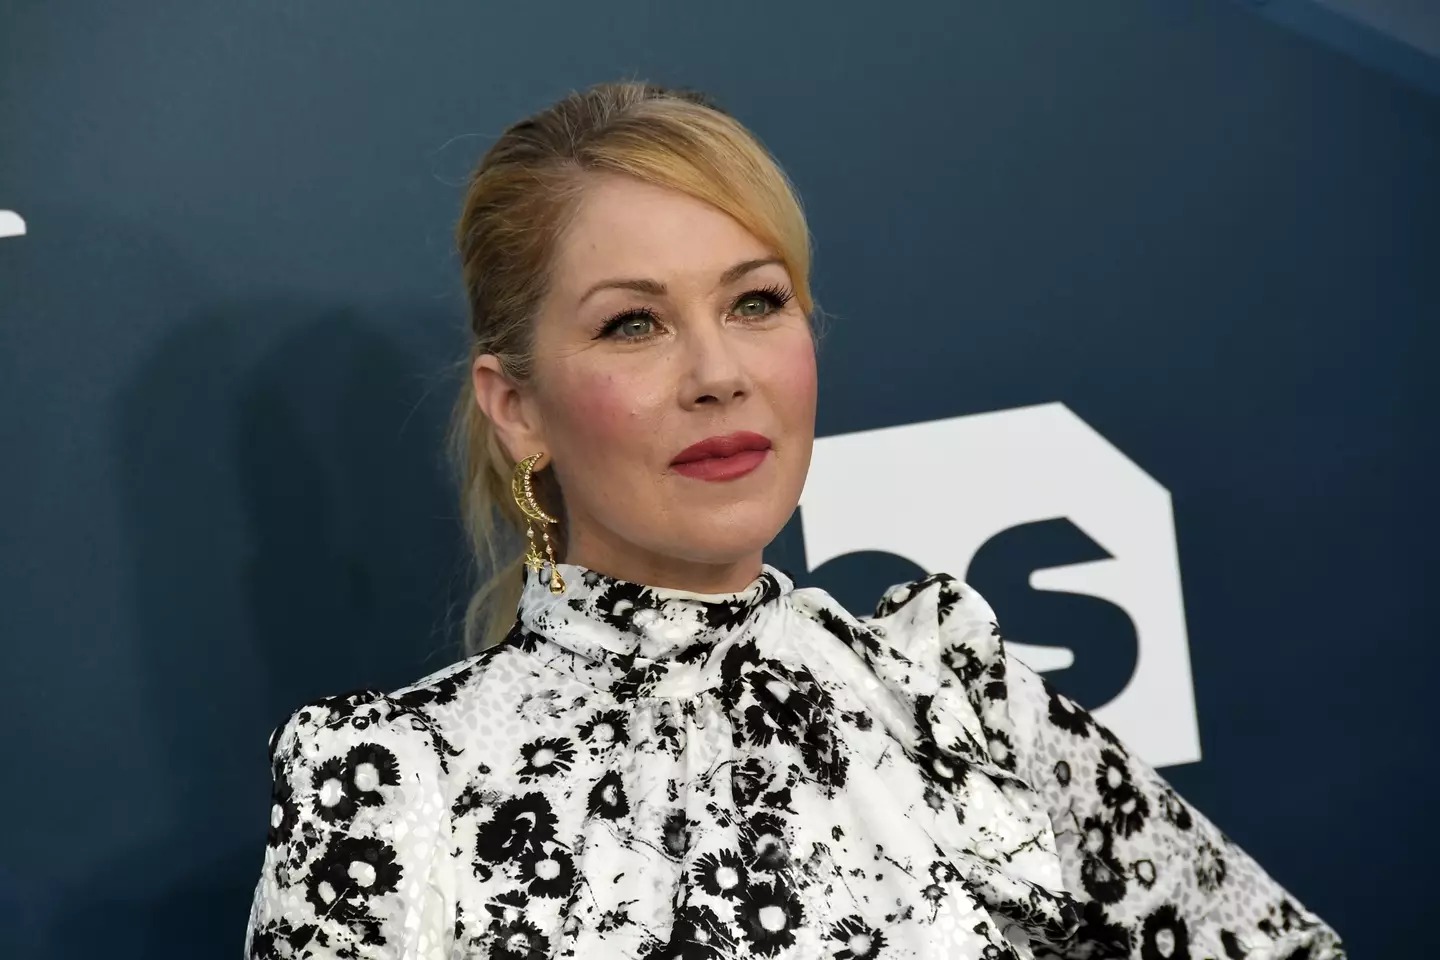 Christina Applegate revealed she was diagnosed with multiple sclerosis in 2021.